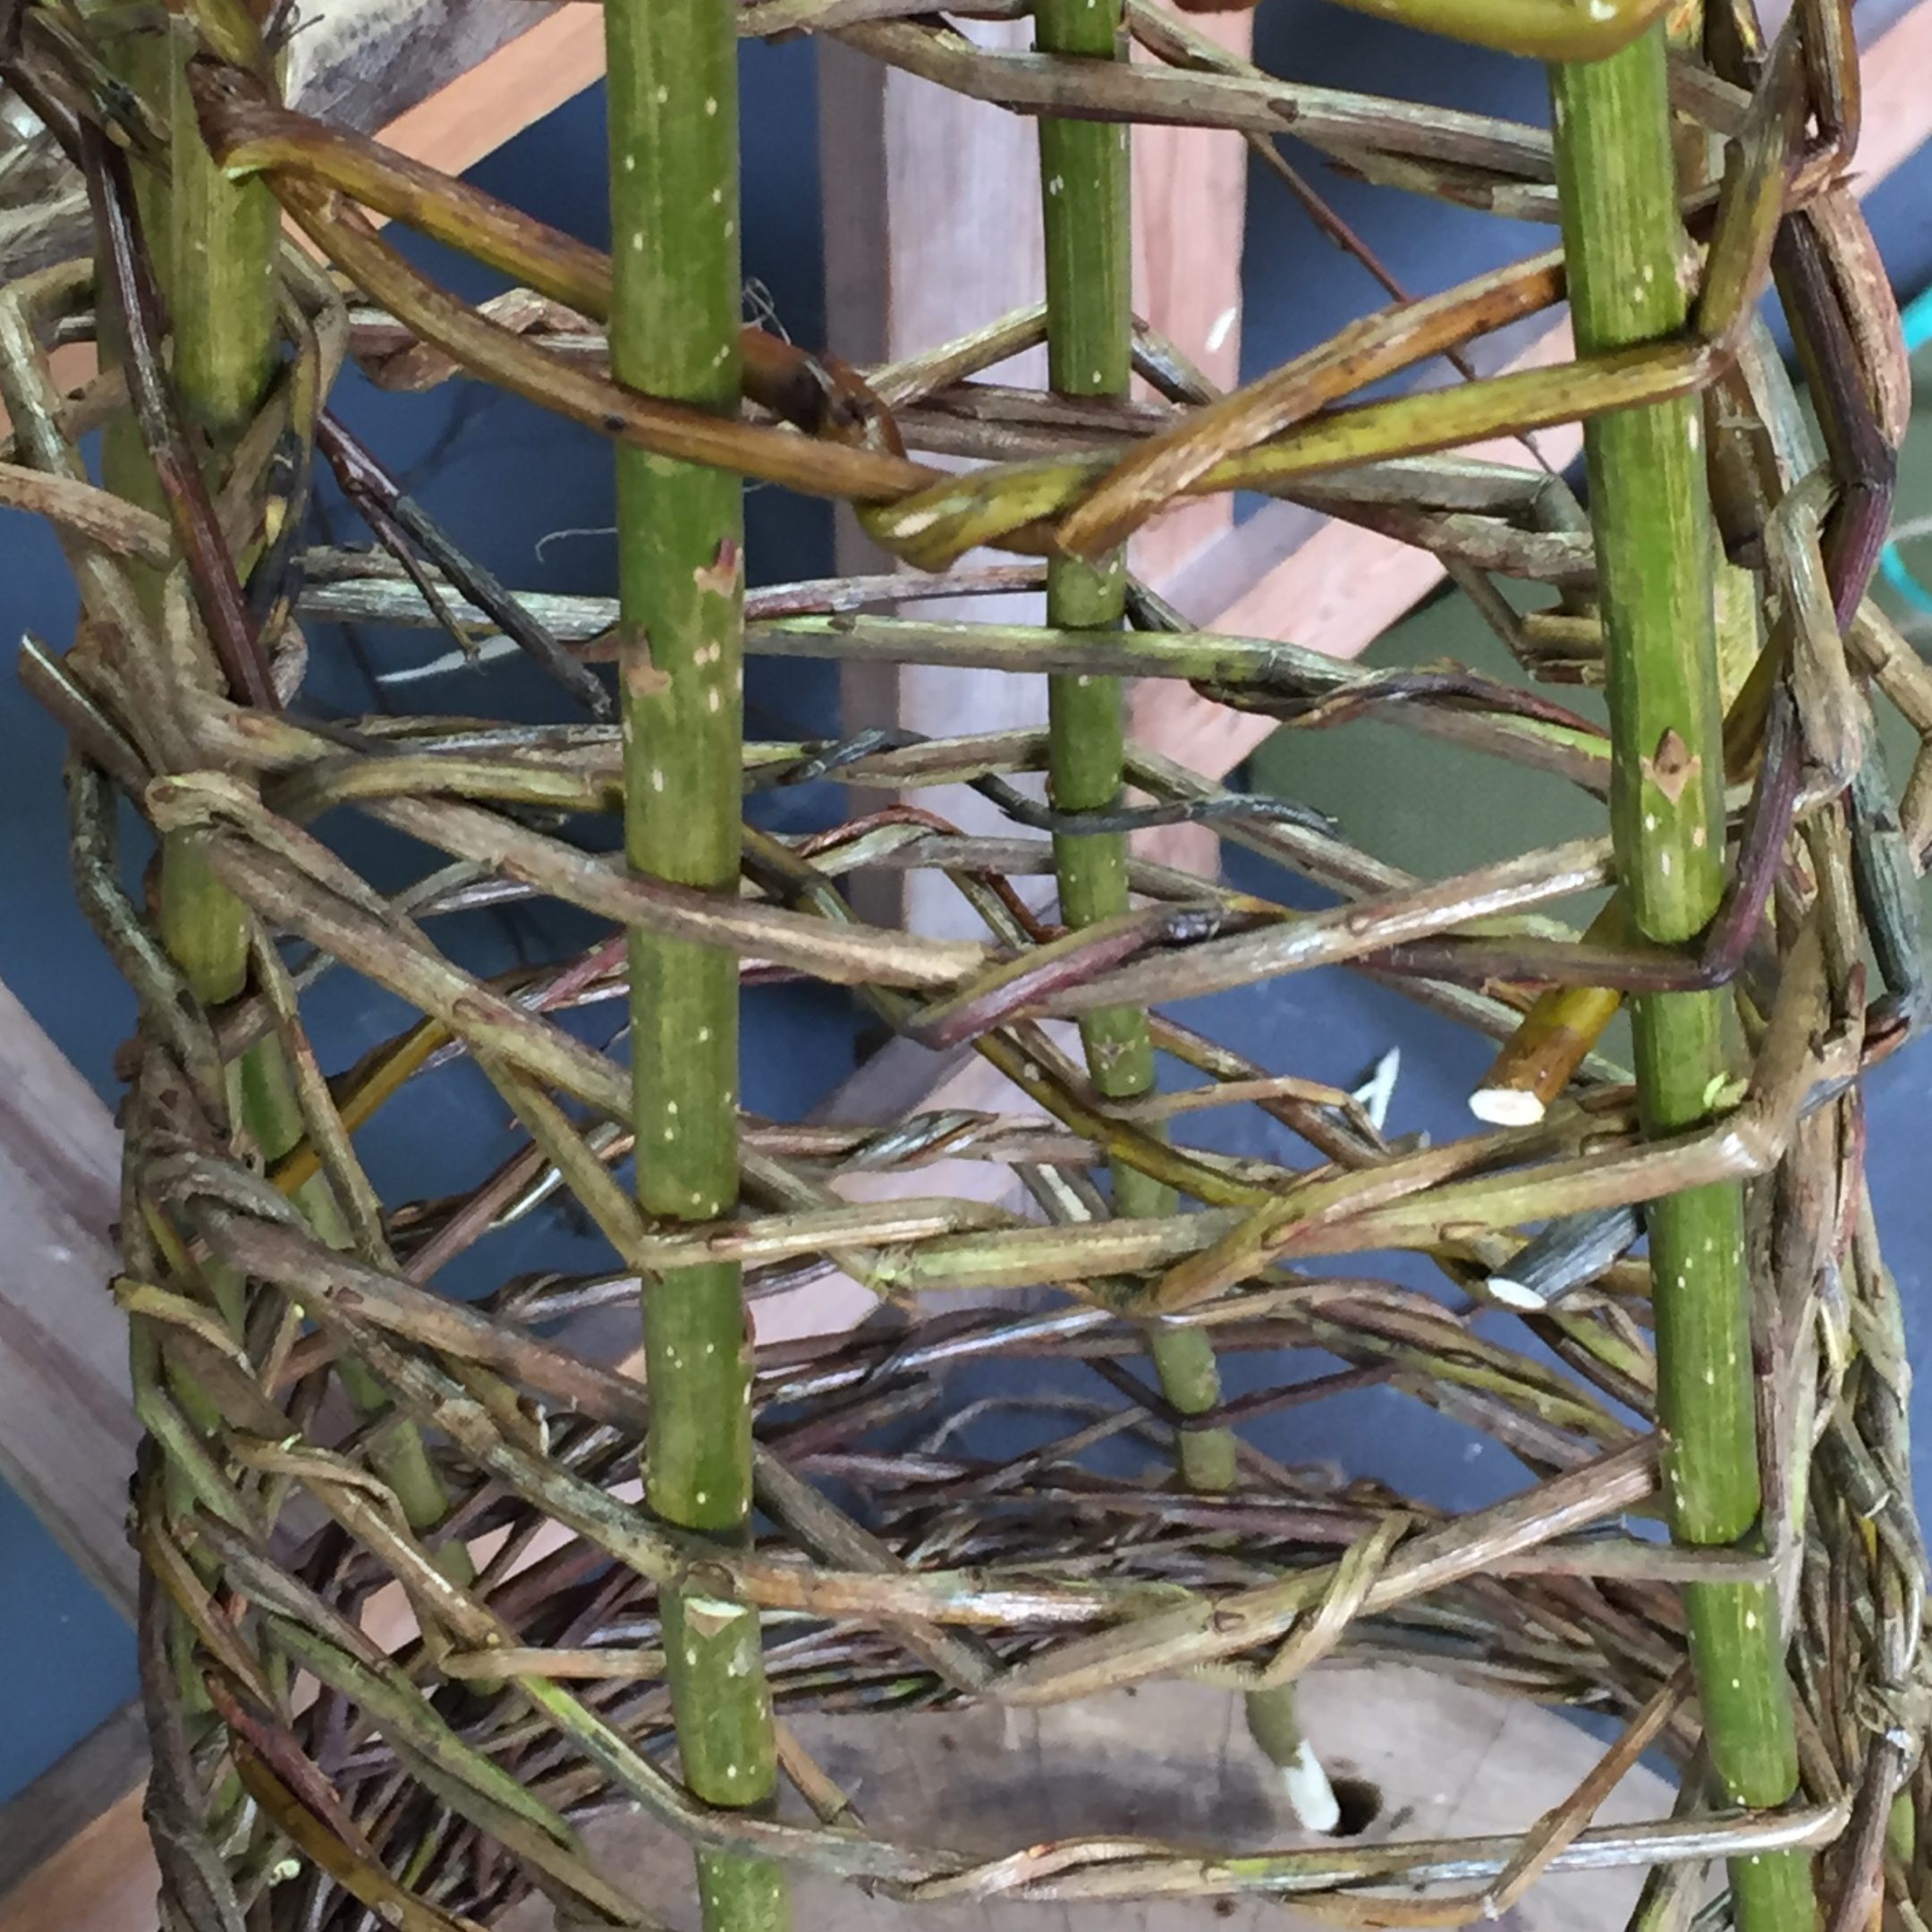 A decorative willow plant support